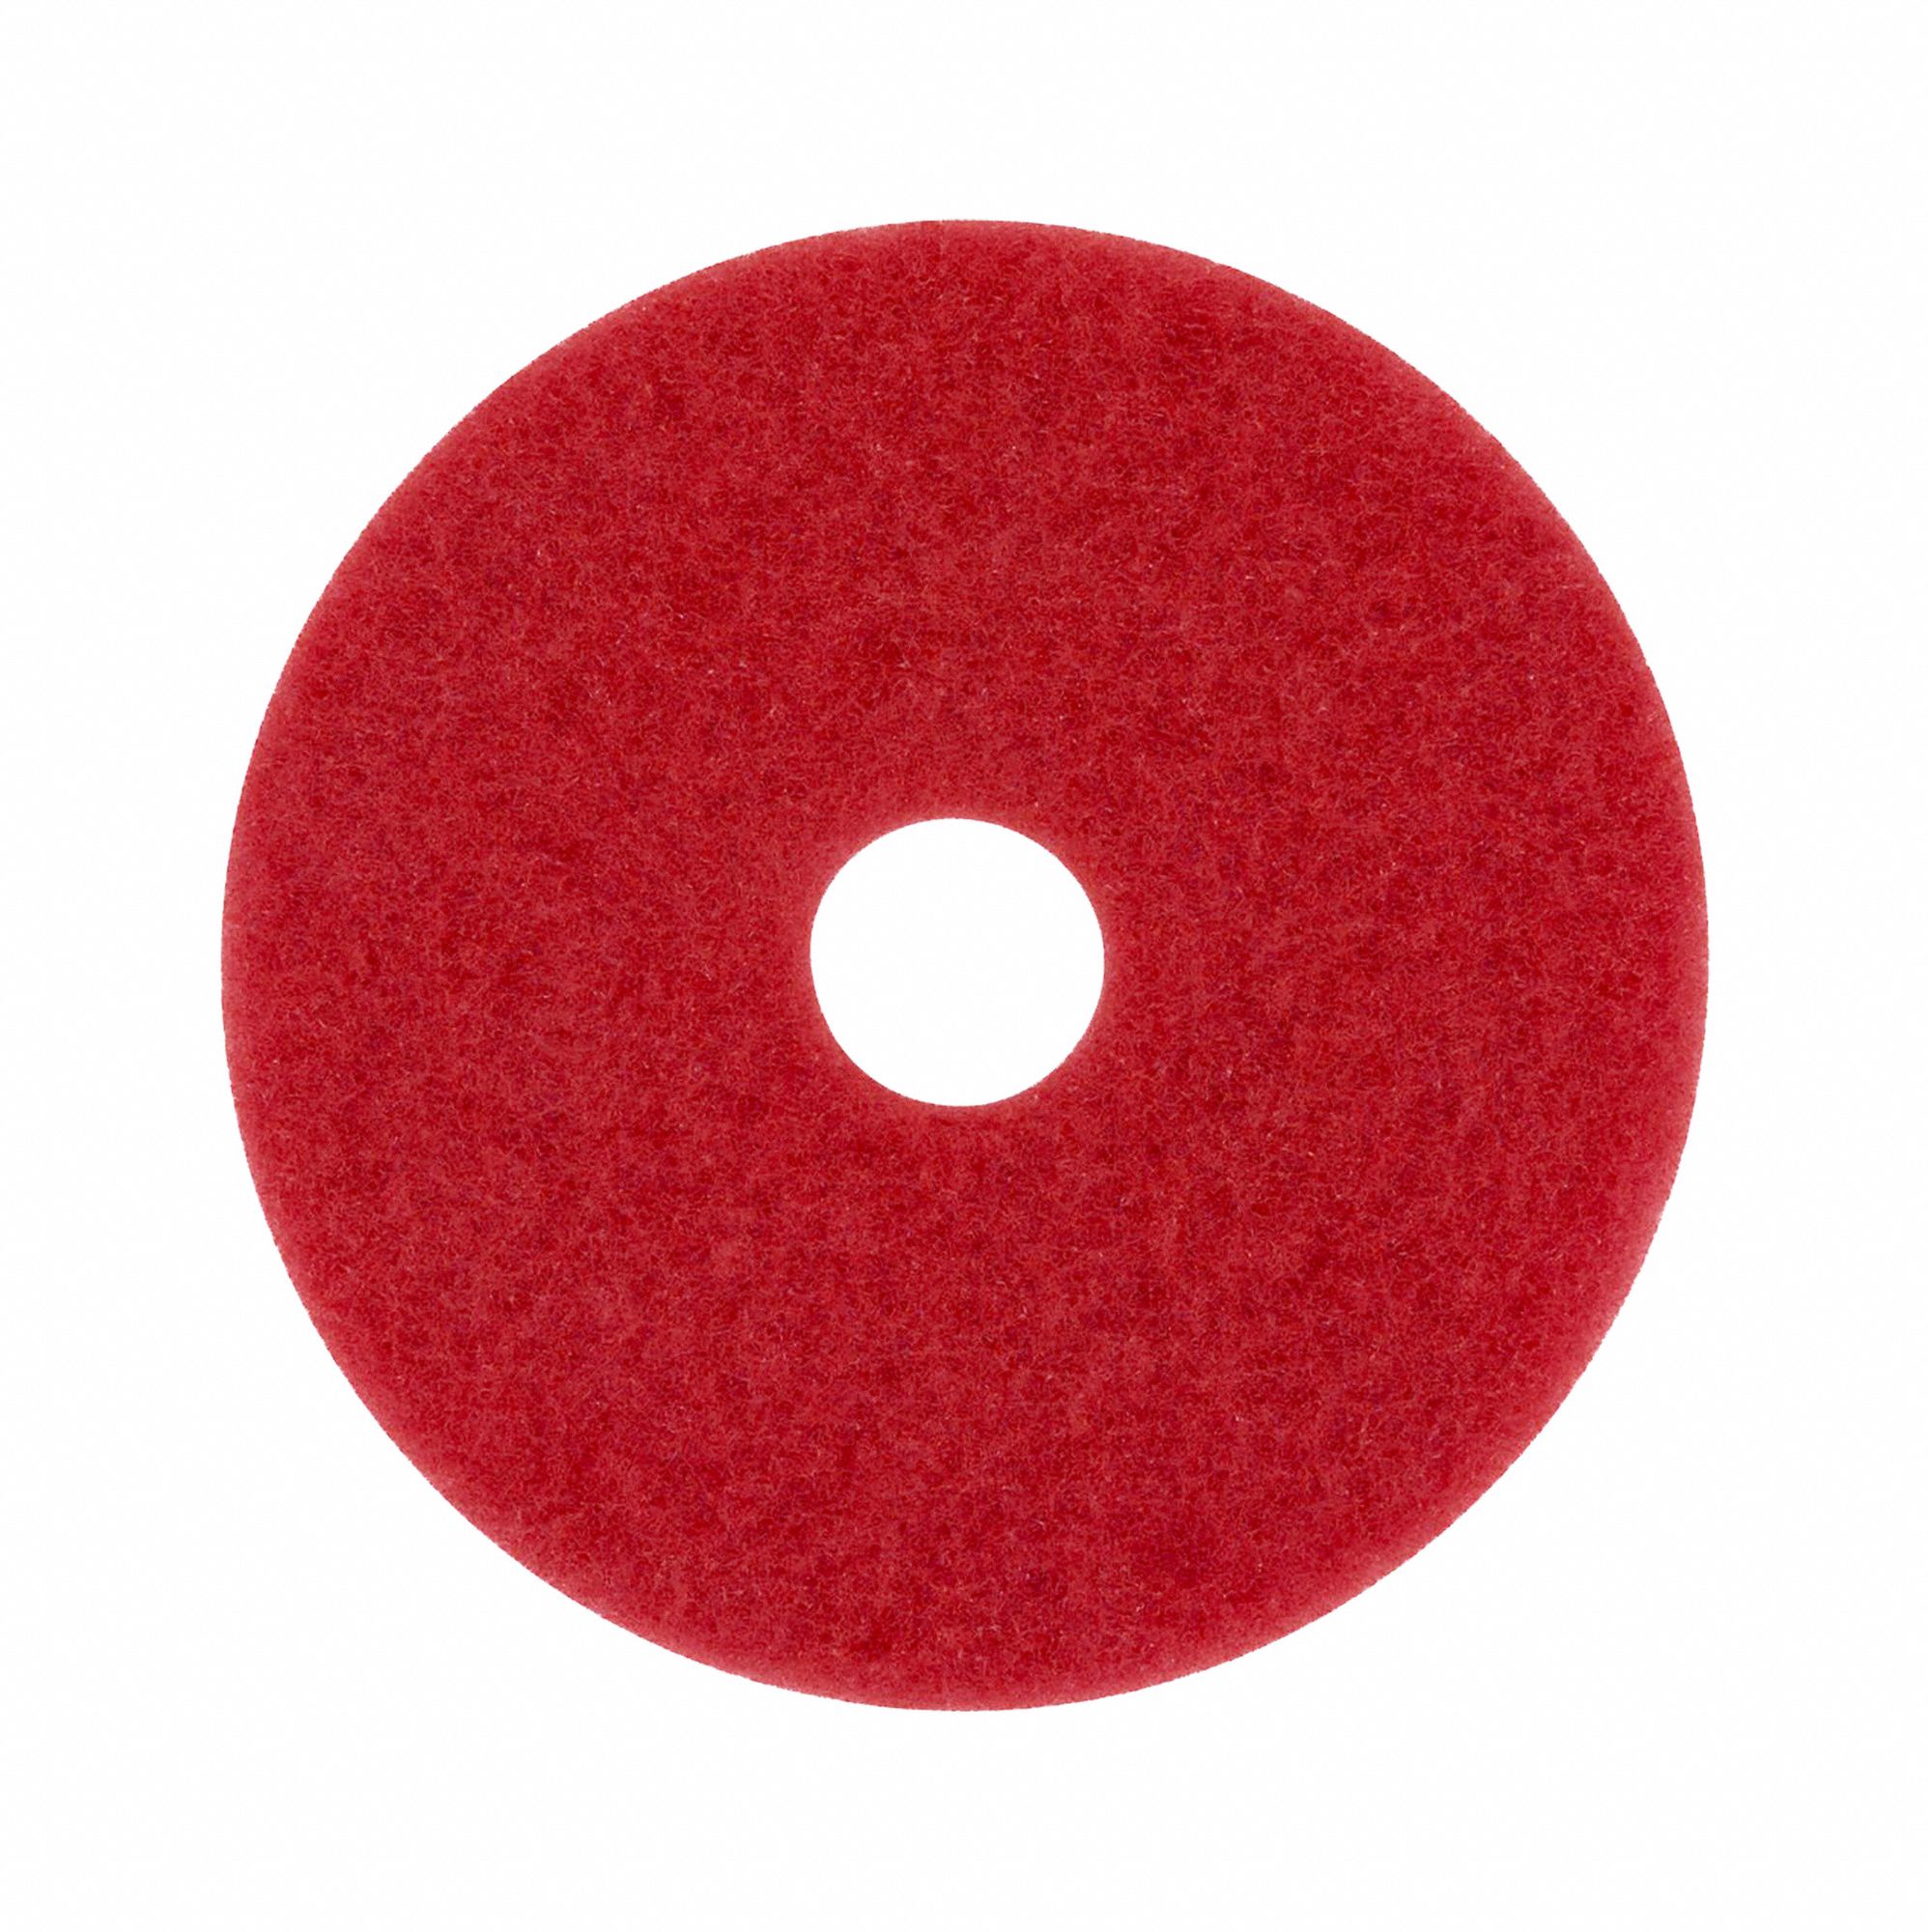 PAD FLOOR RED BUFFING, 12